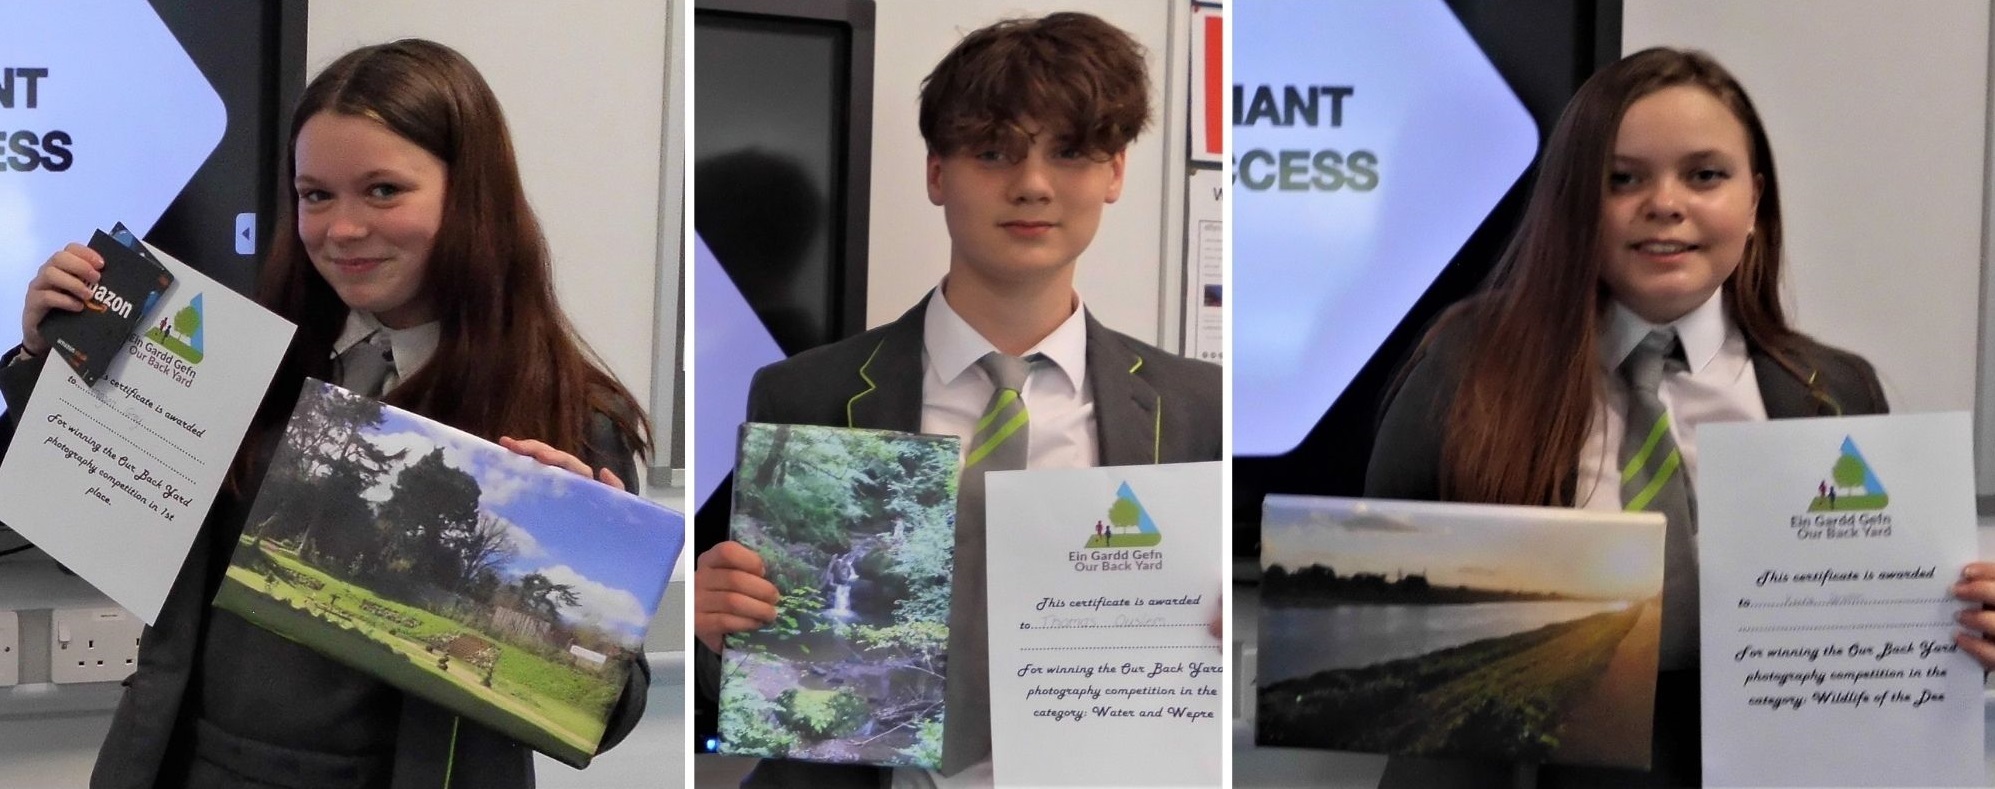 Connah’s Quay High School photography competition winners, Imogen Grey, Thomas Ouslem and Keira Sproston.